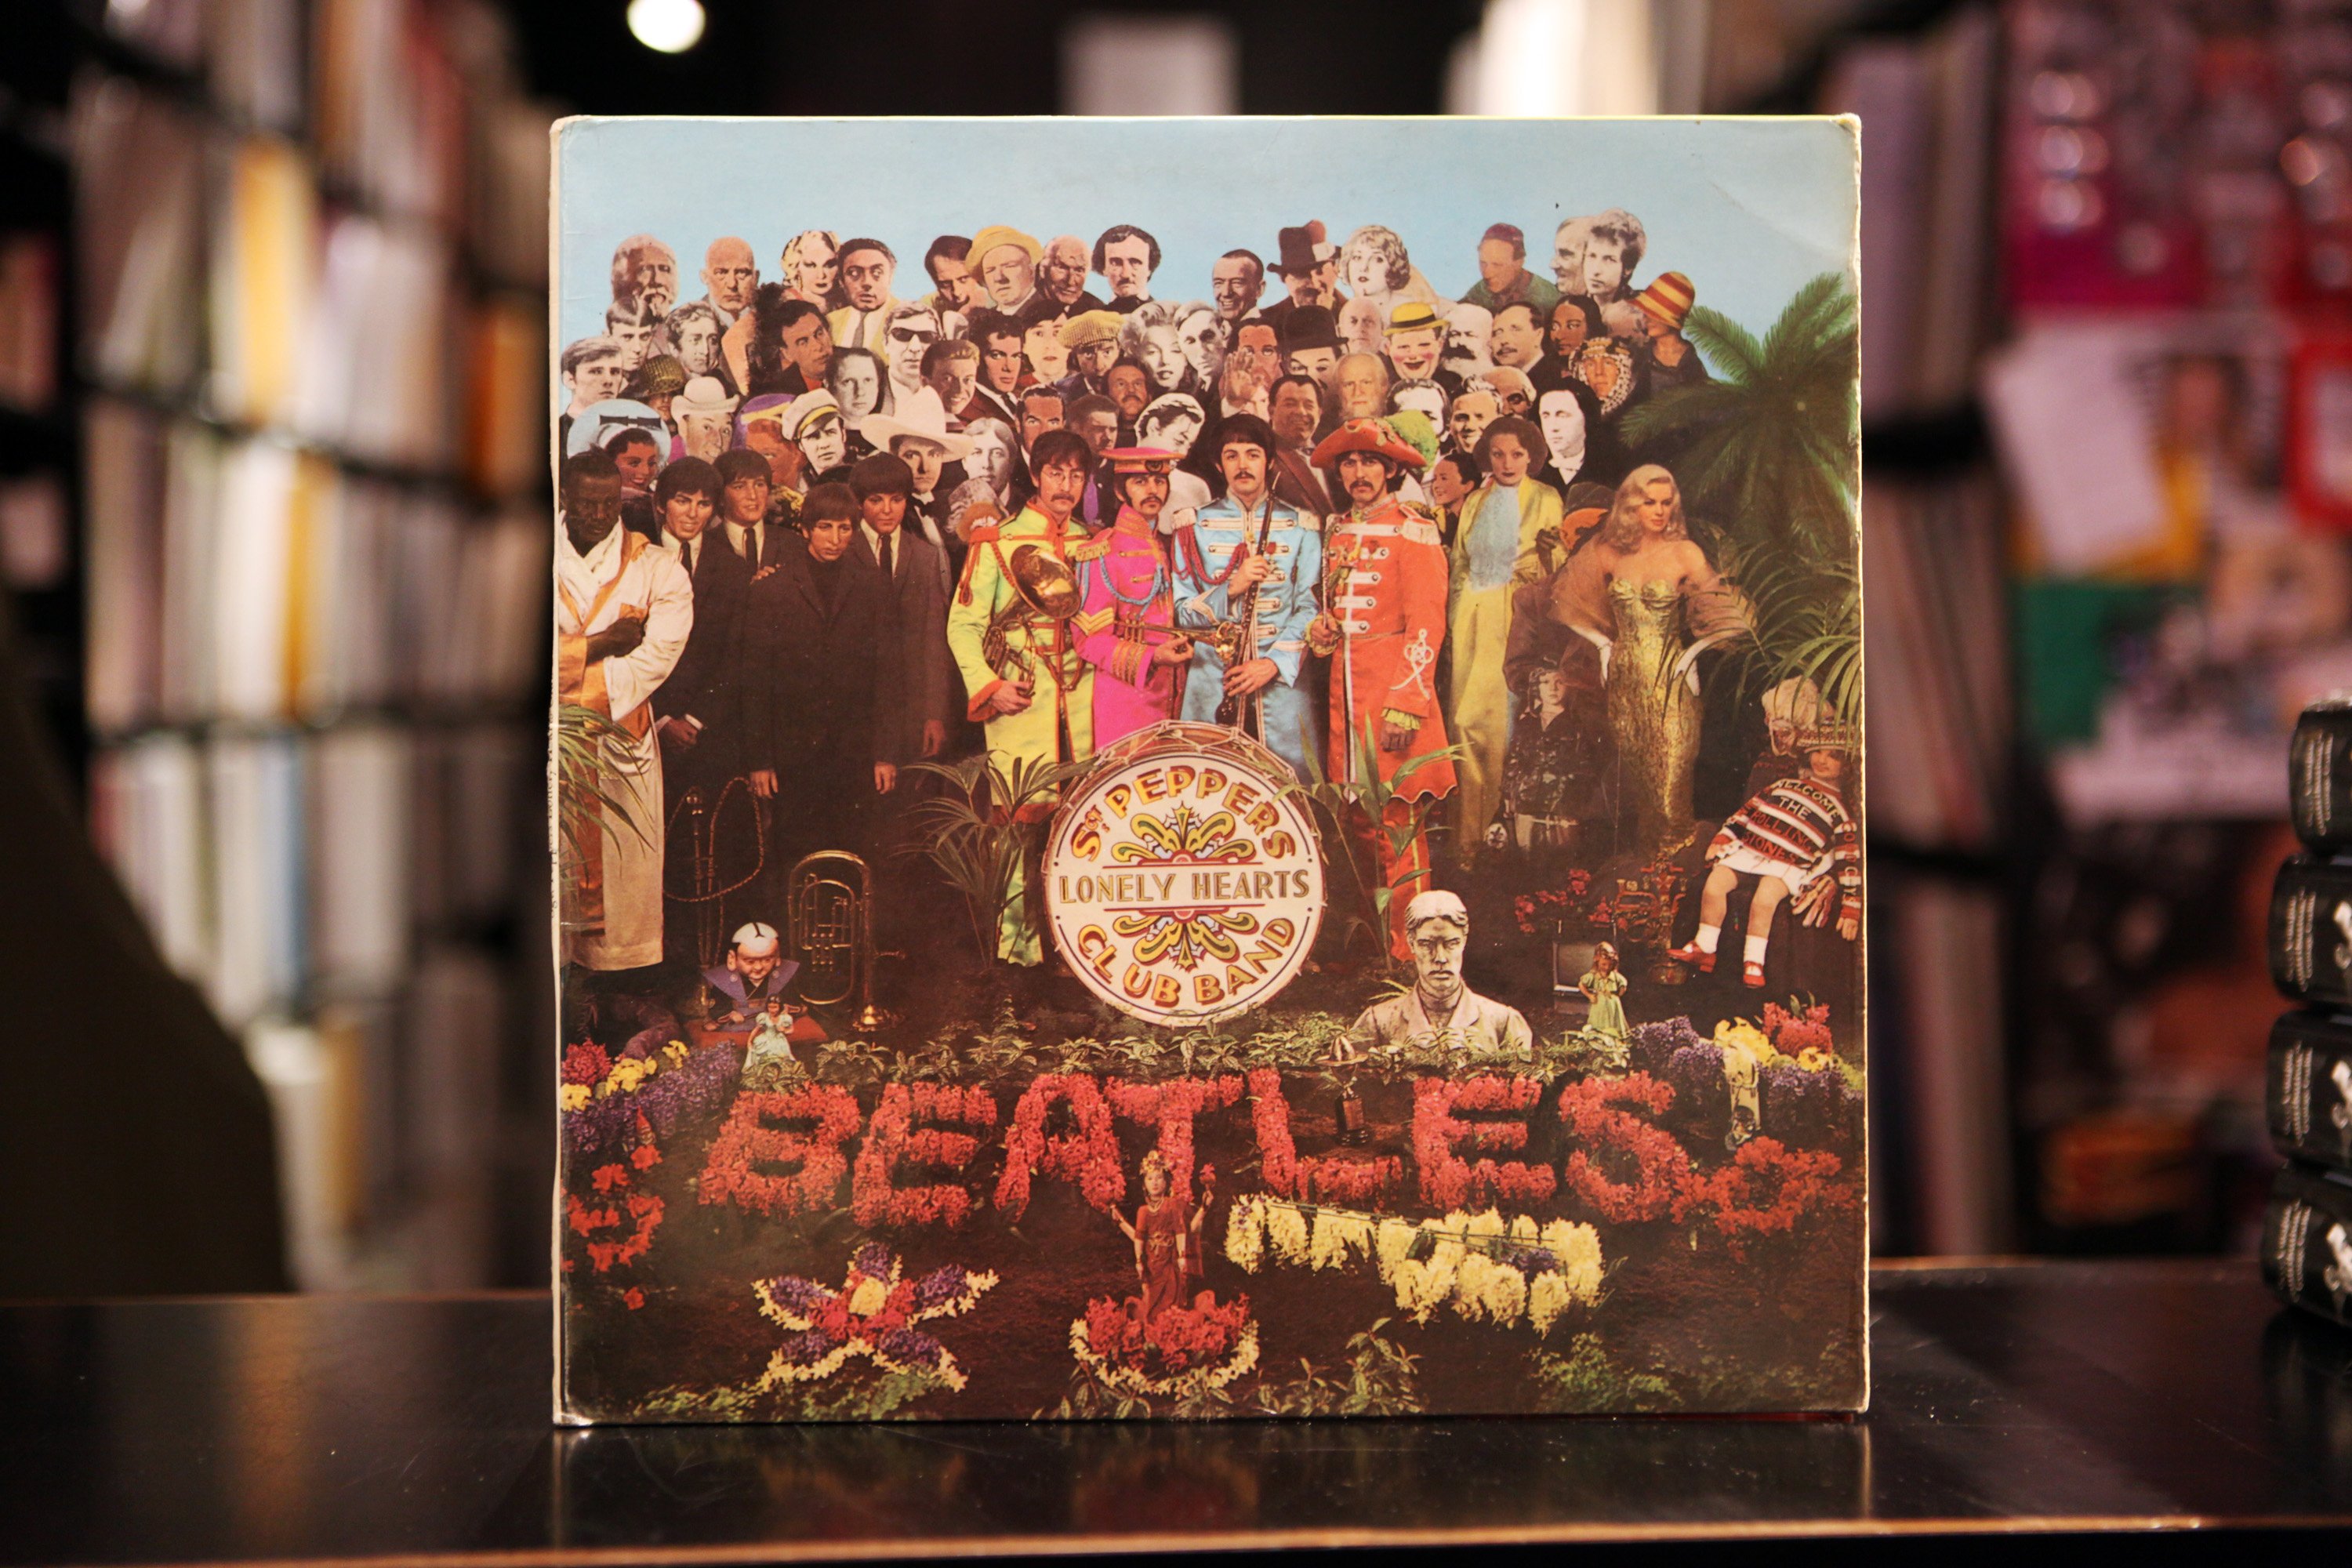 A vinyl LP for The Beatles album Sgt. Pepper's Lonely Hearts Club Band sits at a record store in London, U.K.